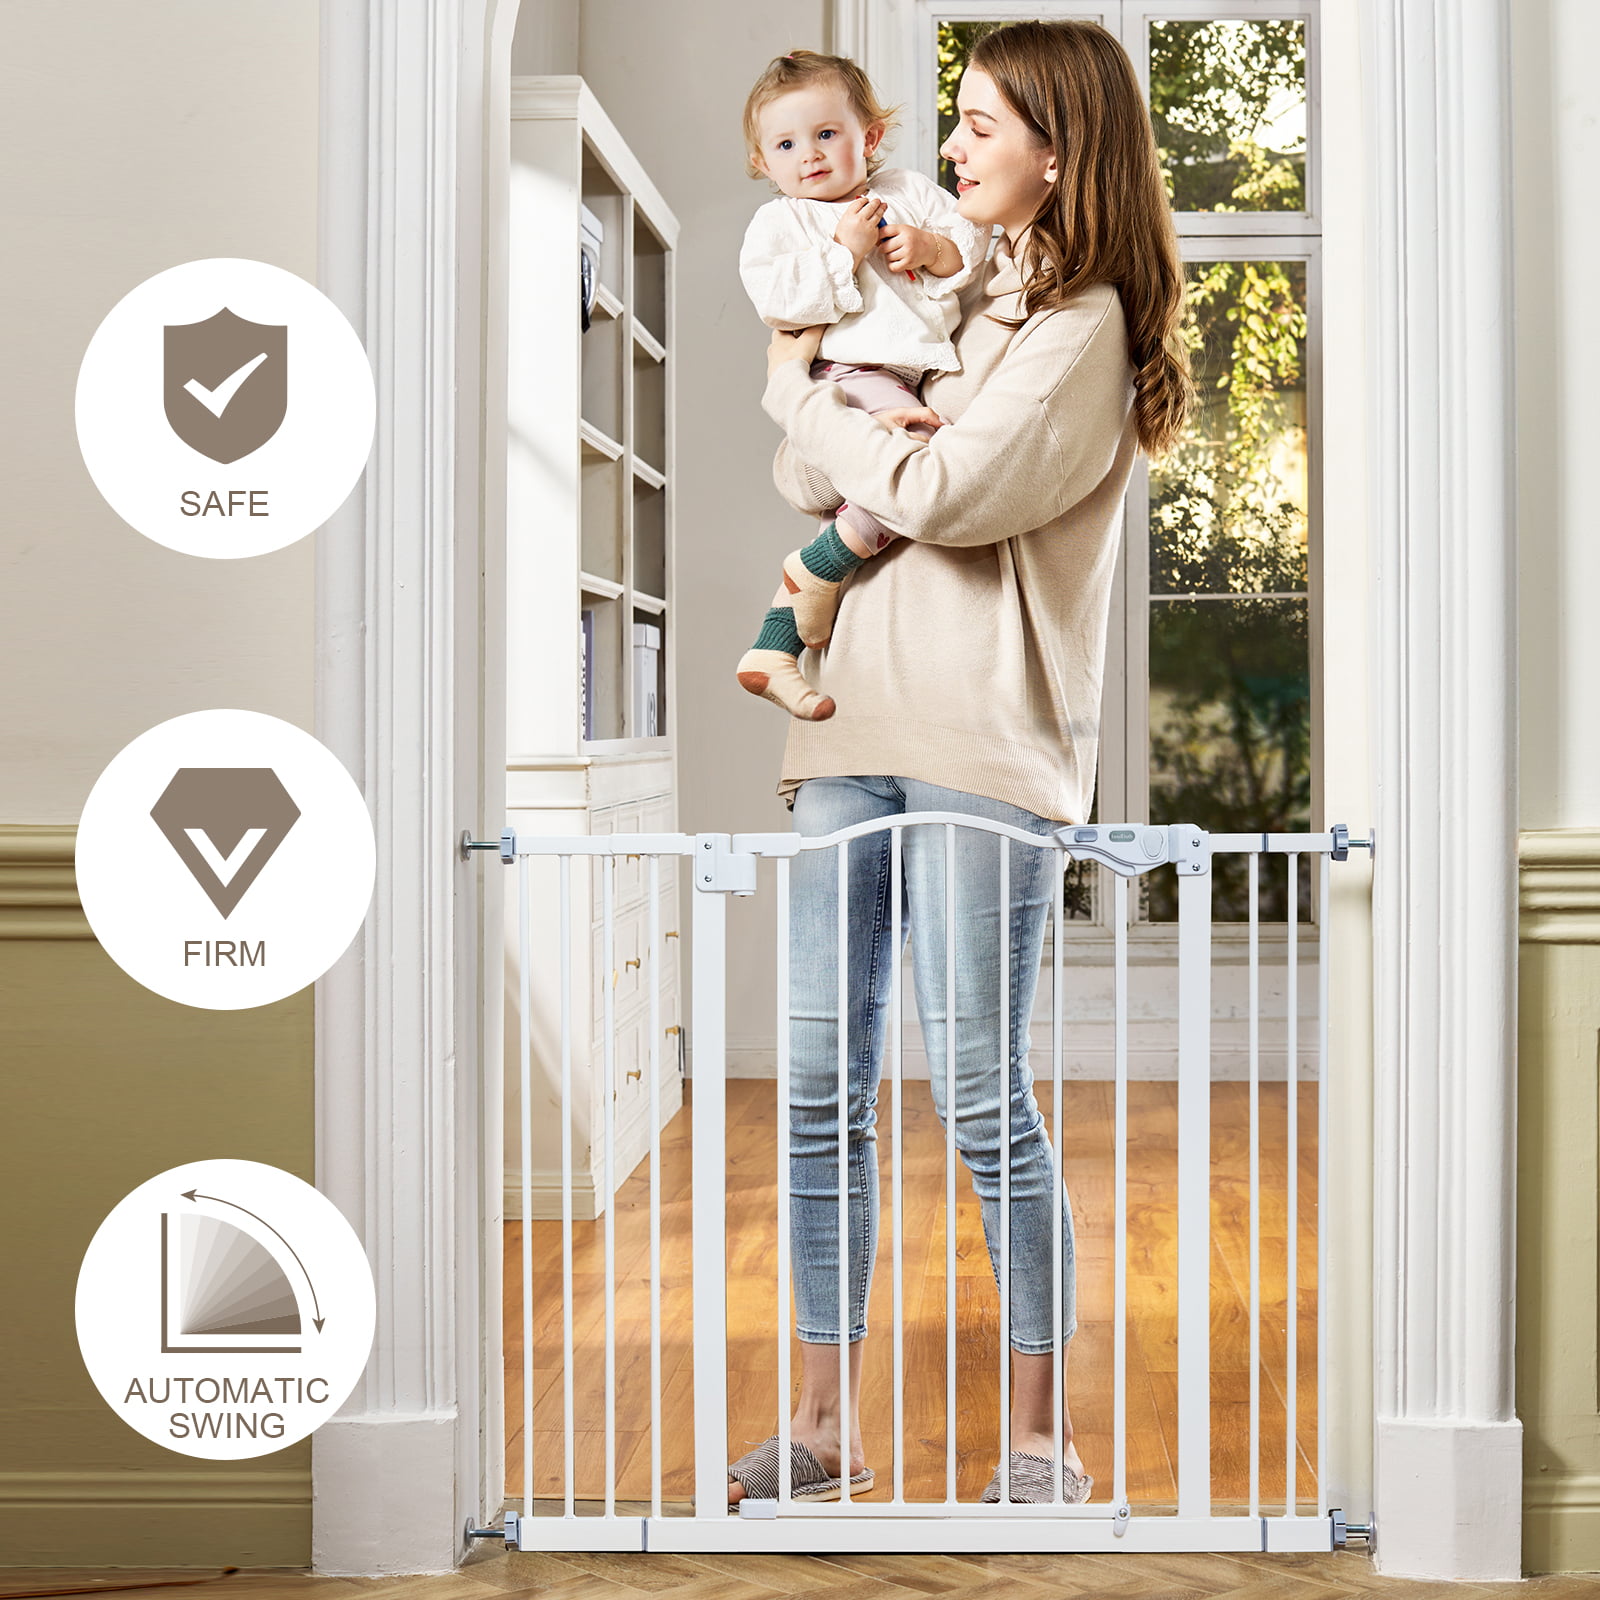 Child Puppy Gate No Drill Bedrooms Auto Close Pet Gate 29 to 39.6 Width with 30 Height Extra Tall Safety Coverage for Stairs InnoTruth Wide Baby Gate for Dogs Hallways 